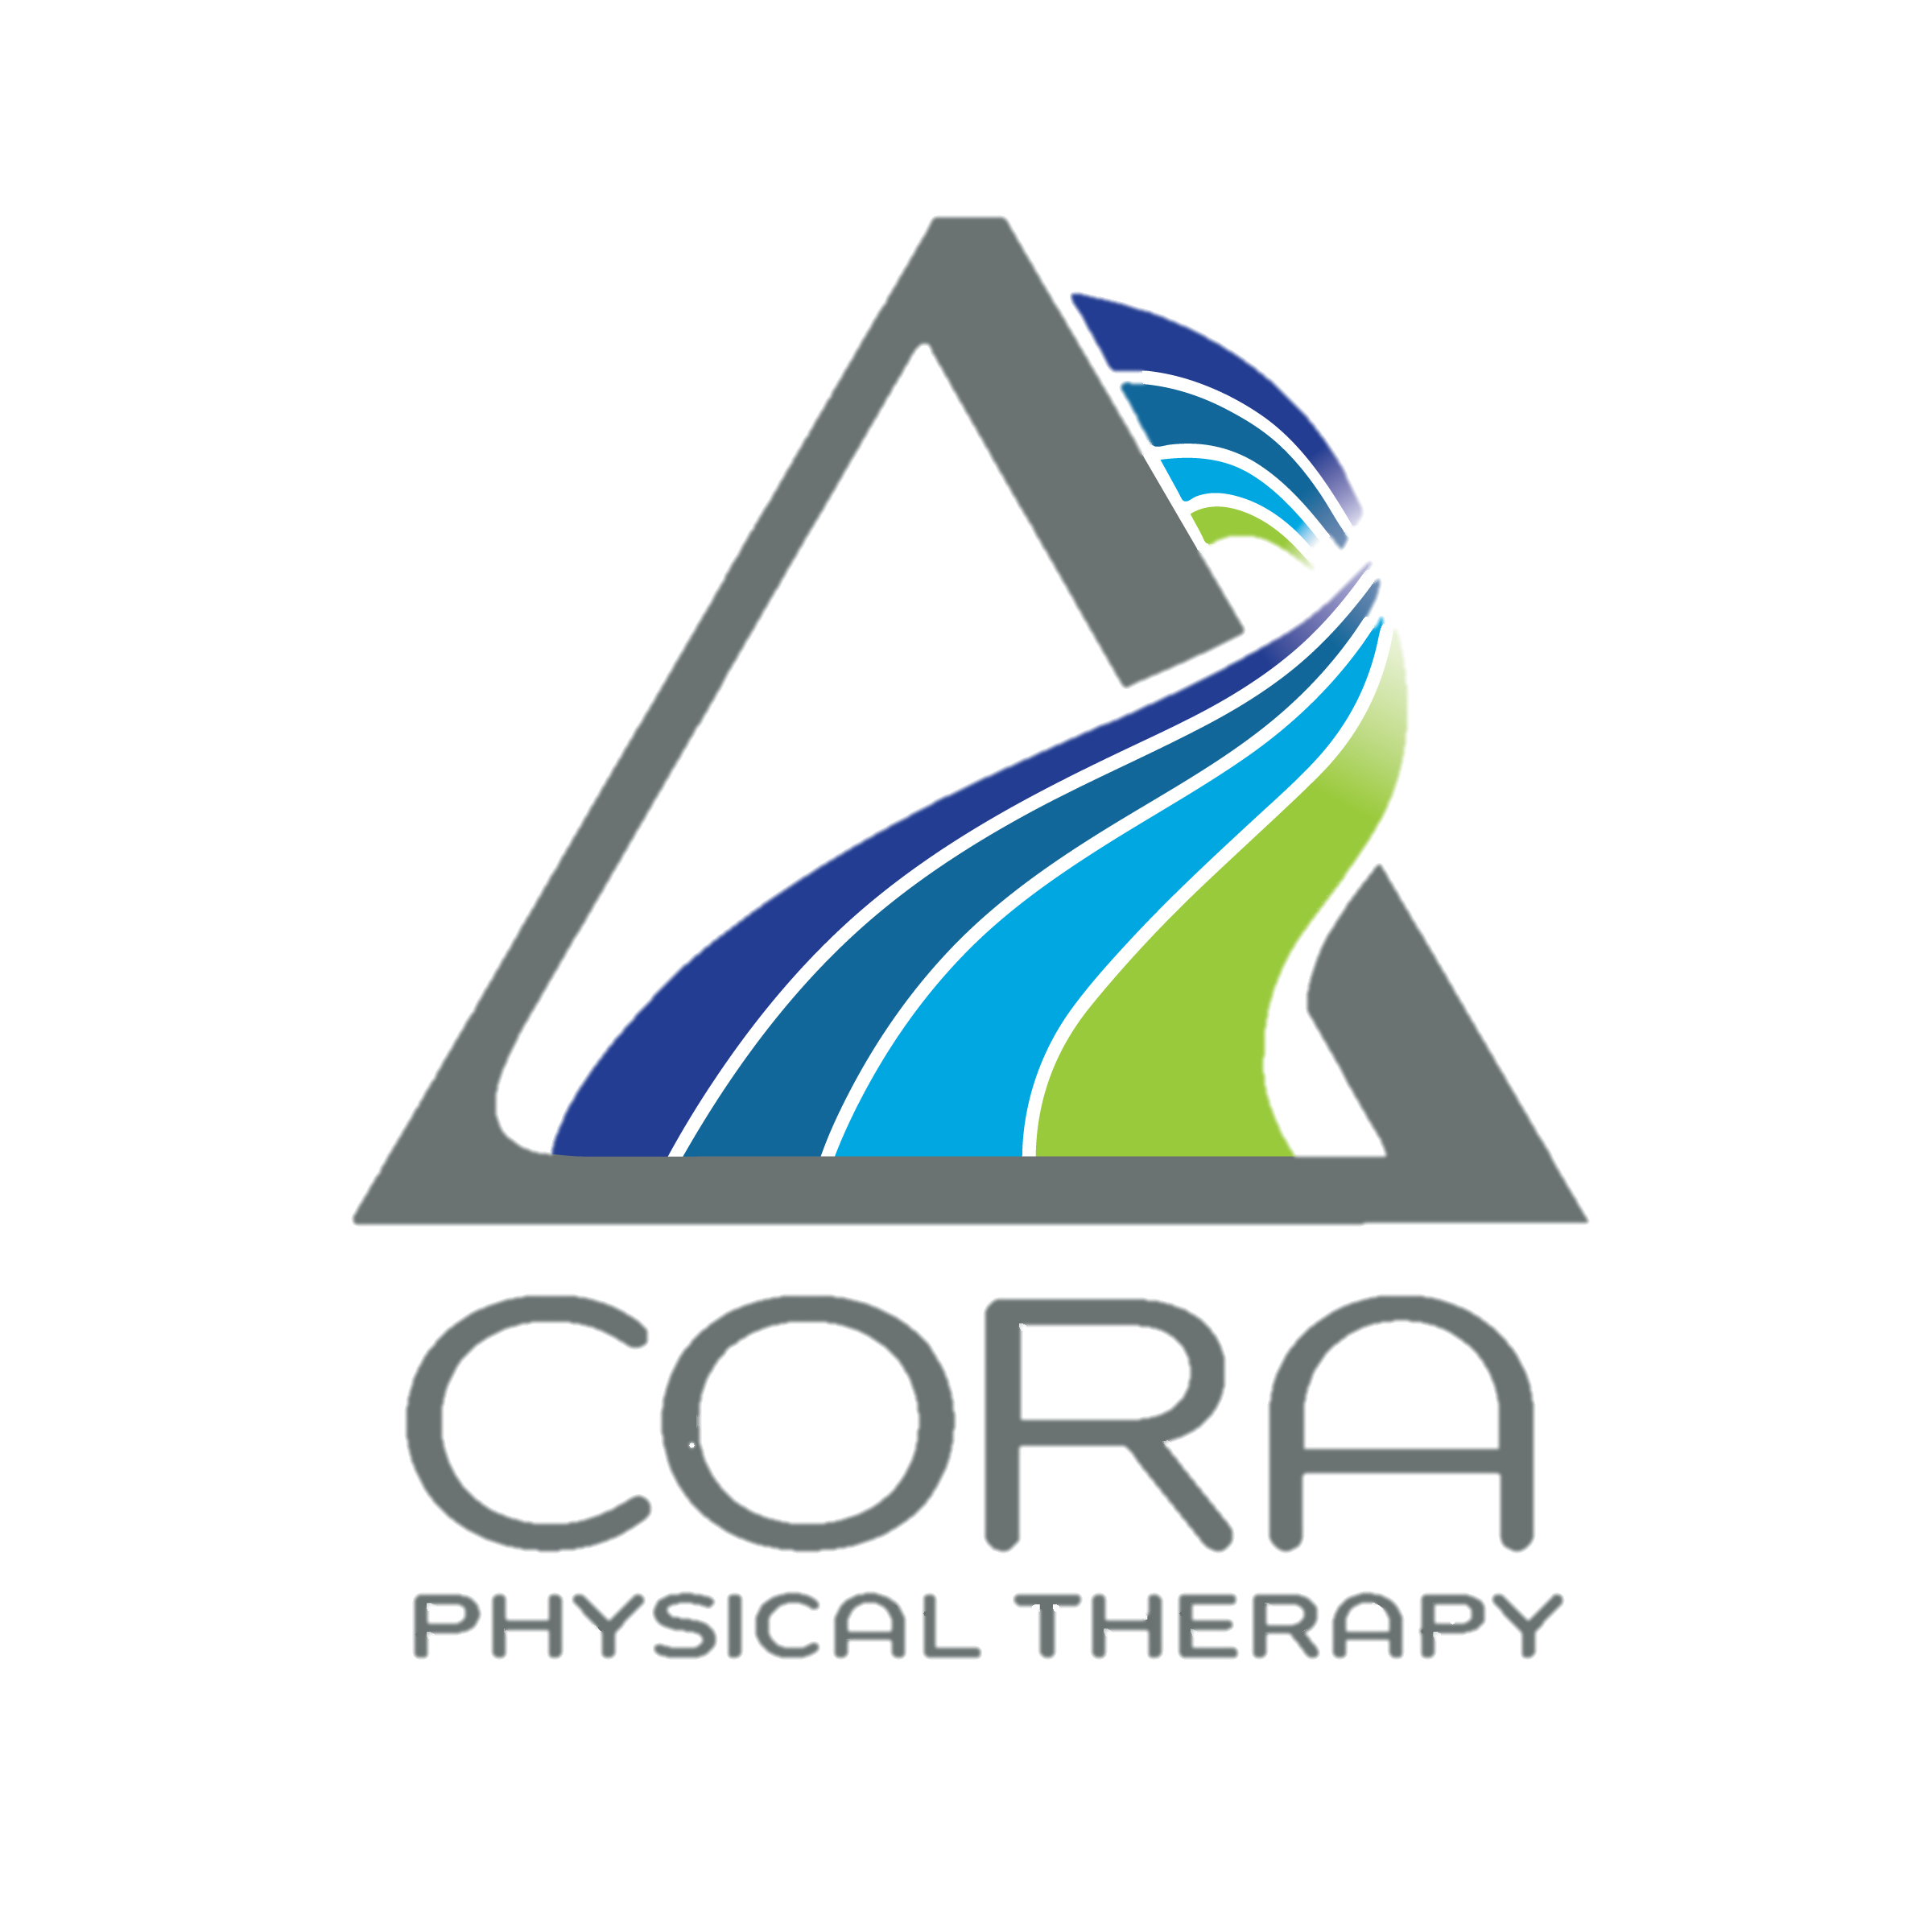 D. CORA Physical Therapy (Steel)